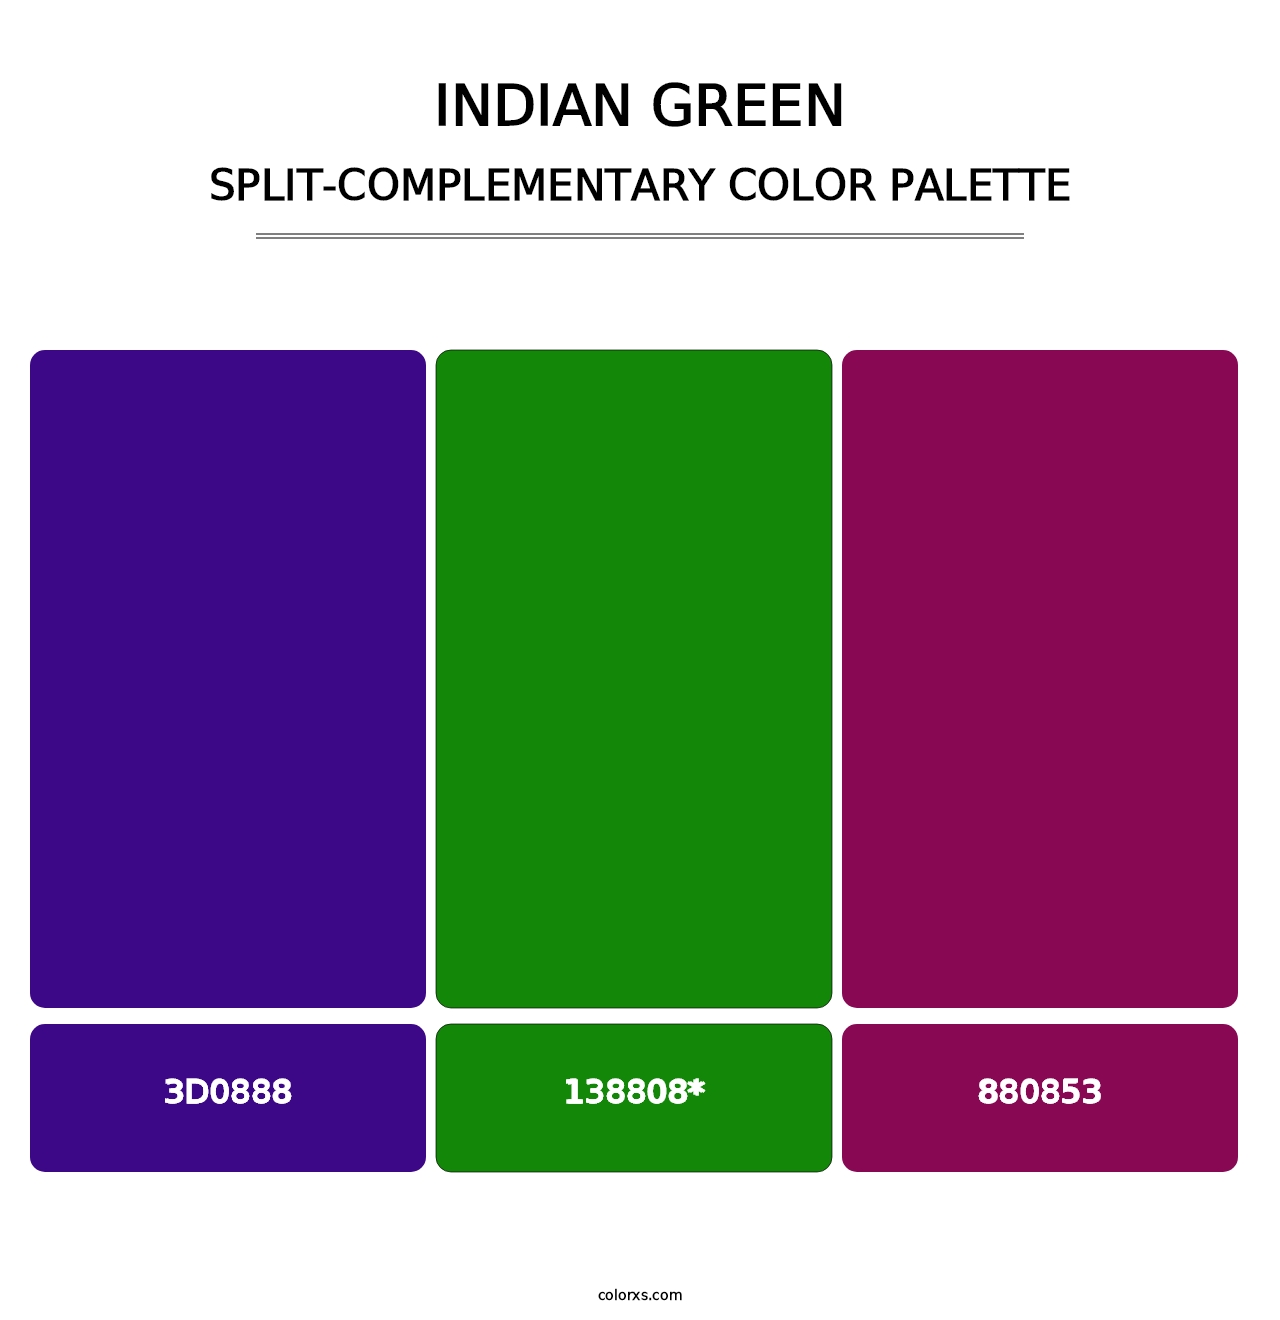 Indian Green - Split-Complementary Color Palette